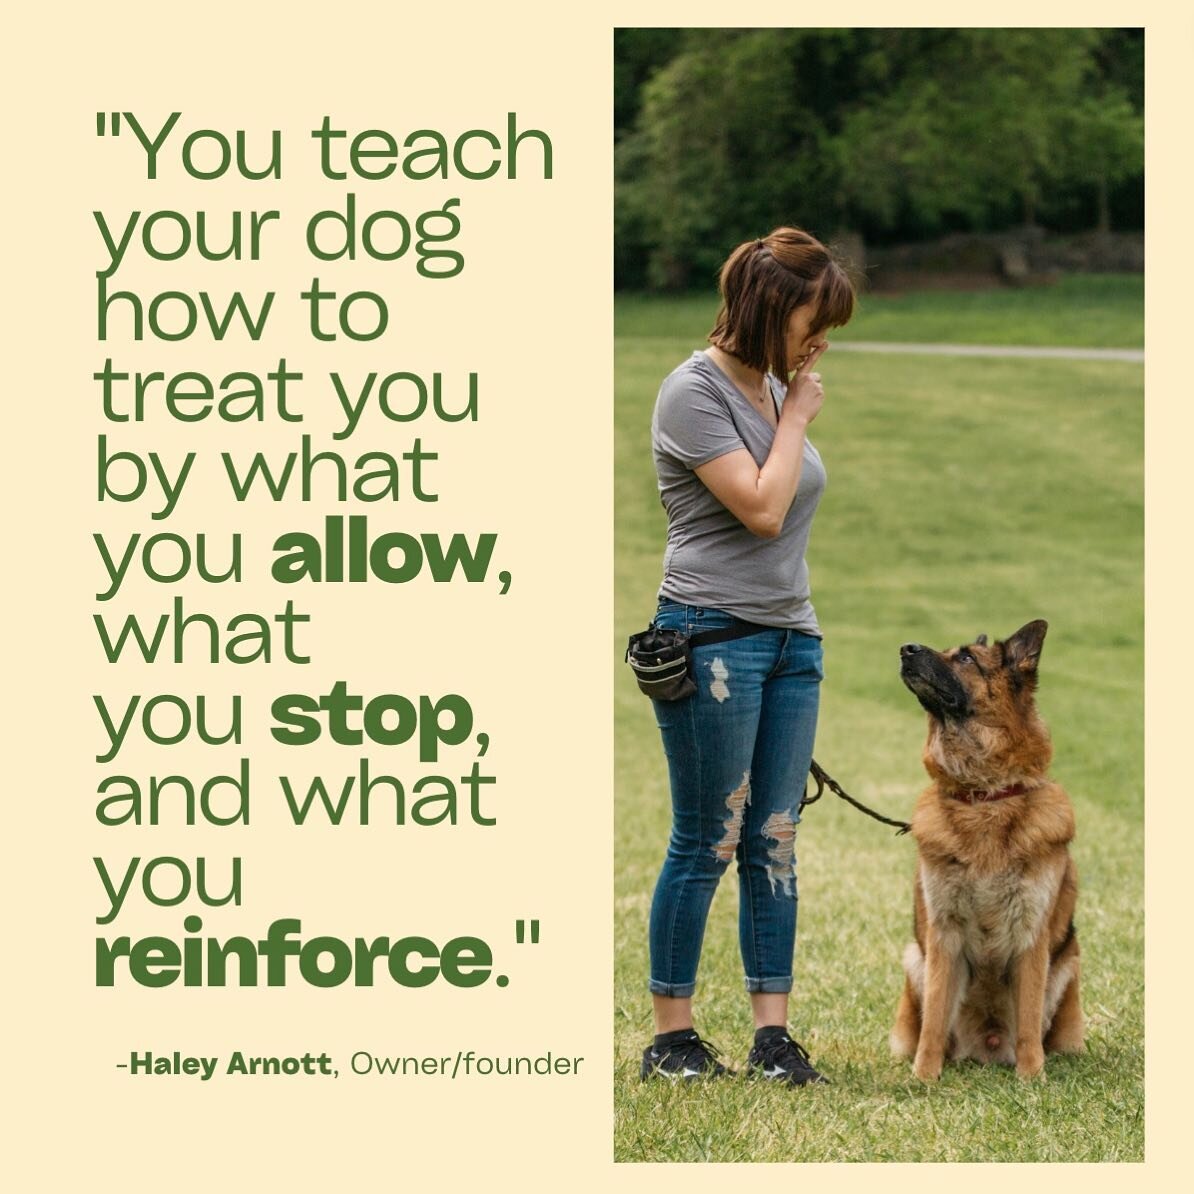 We&rsquo;re ALL guilty of allowing poor behavior from our dogs. I&rsquo;m curious to know, what kinds of poor behaviors have you been allowing? Write in the comments below. Judgement free zone! 
.
..
&hellip;
&hellip;.
#rockytop #nashvilledogtrainer 